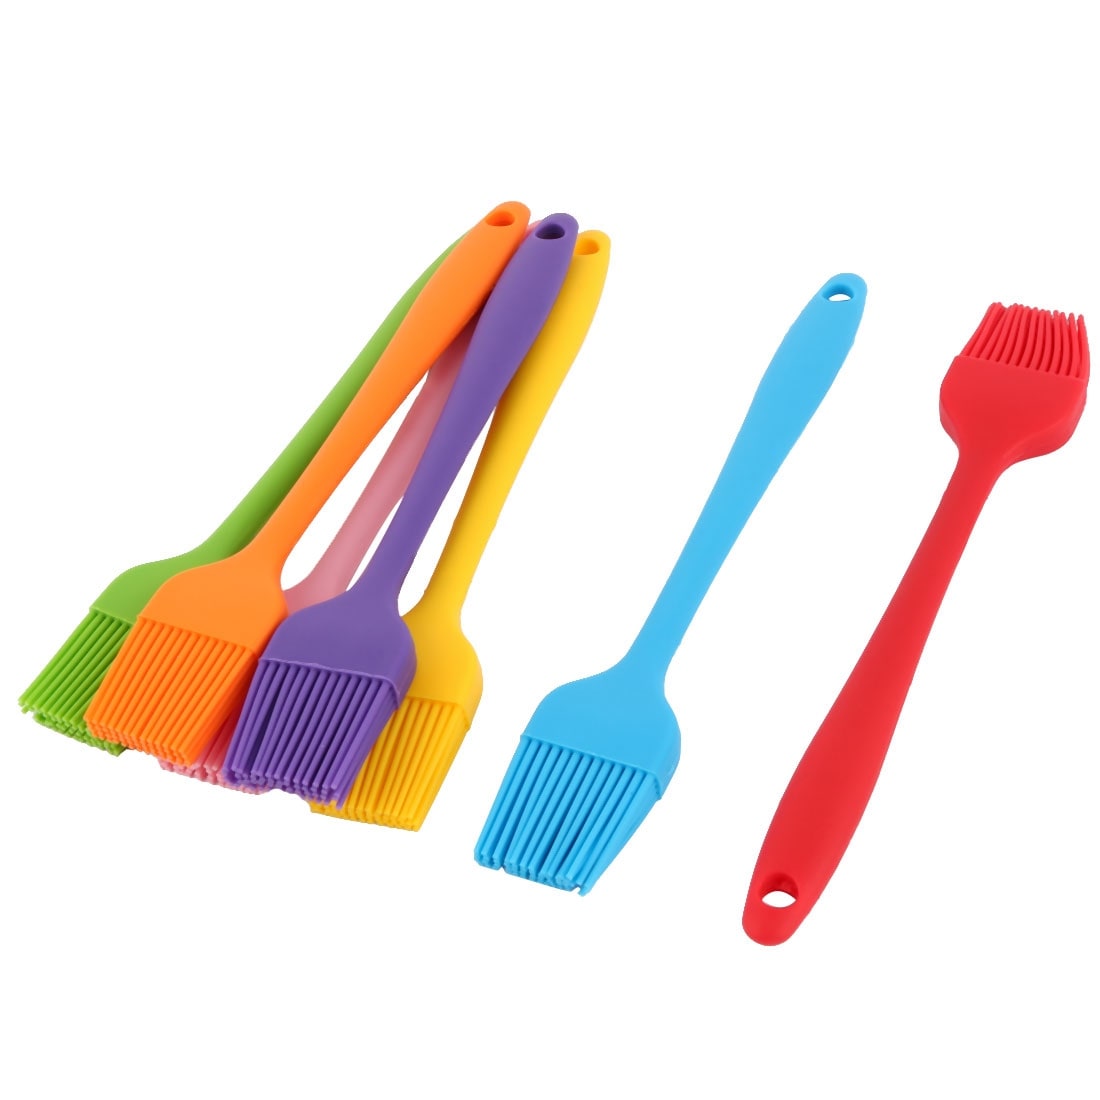 https://ak1.ostkcdn.com/images/products/is/images/direct/83e3616ffd3681dac1fd510071828459aade9dcc/Bakery-Cookie-Cake-Baking-Tool-Cream-Butter-Pastry-Brush-Assorted-Color-7pcs.jpg